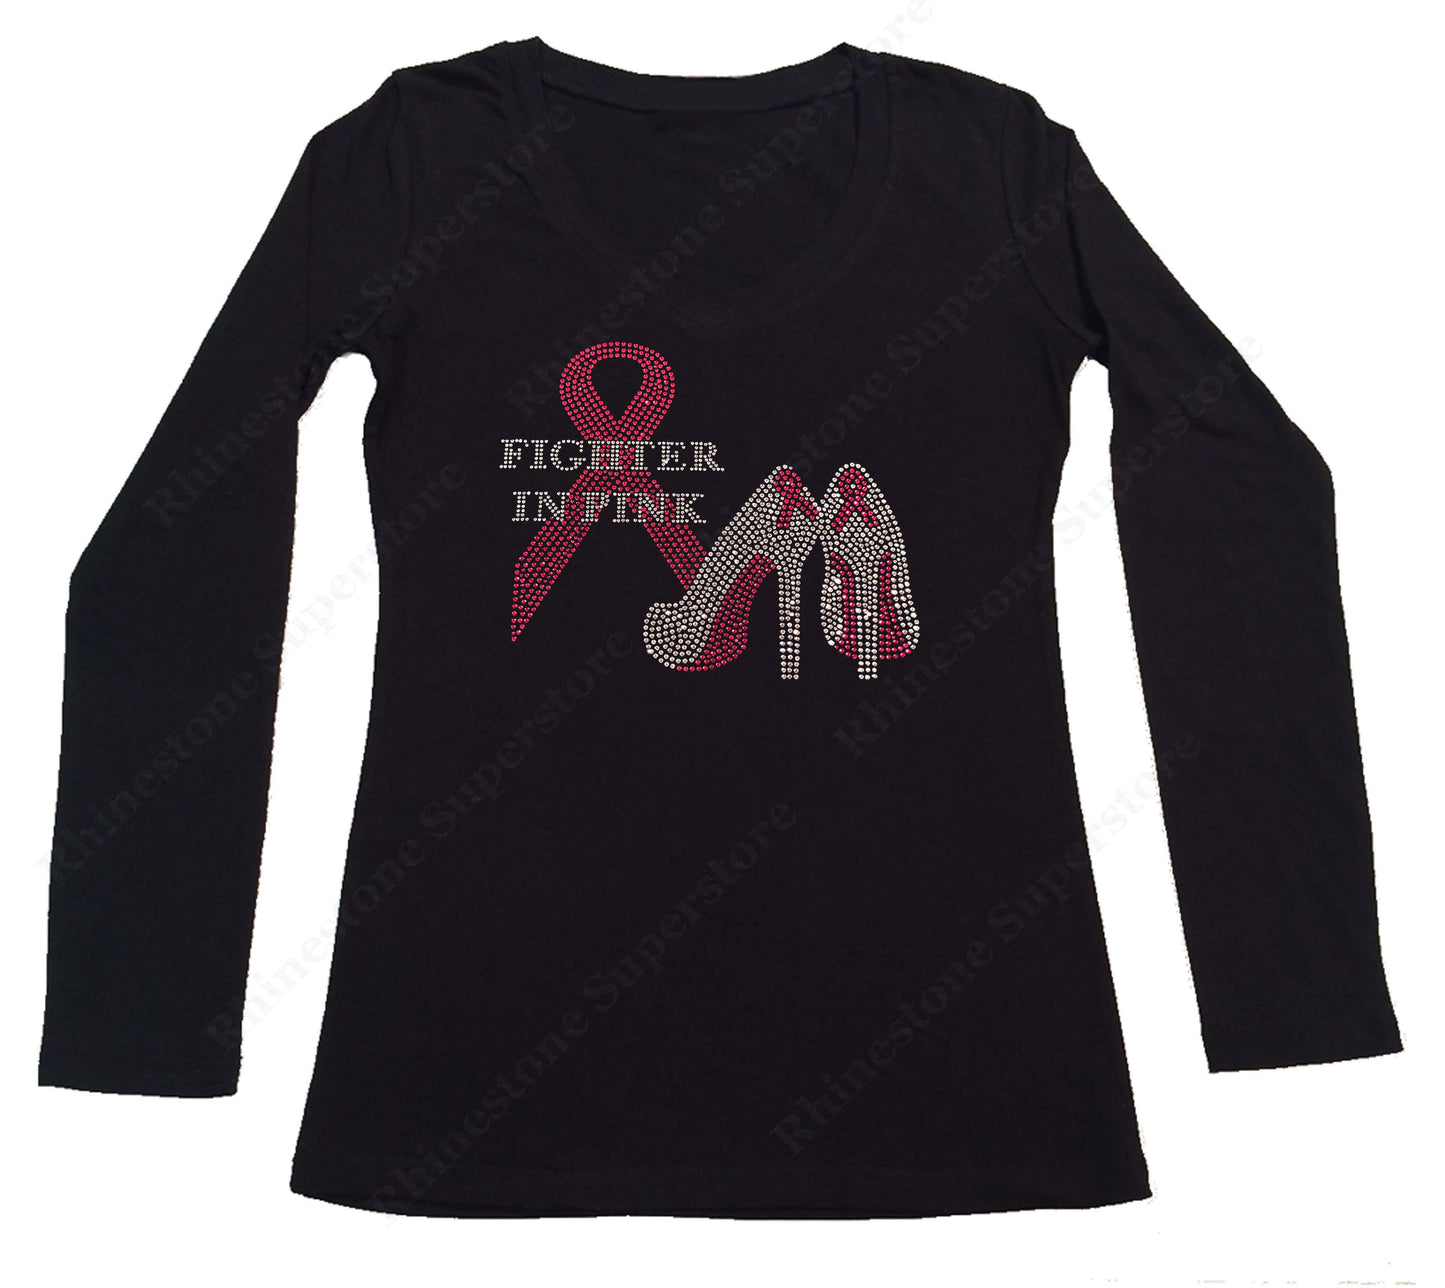 Womens T-shirt with Pink Cancer Ribbon & Heels in Rhinestones